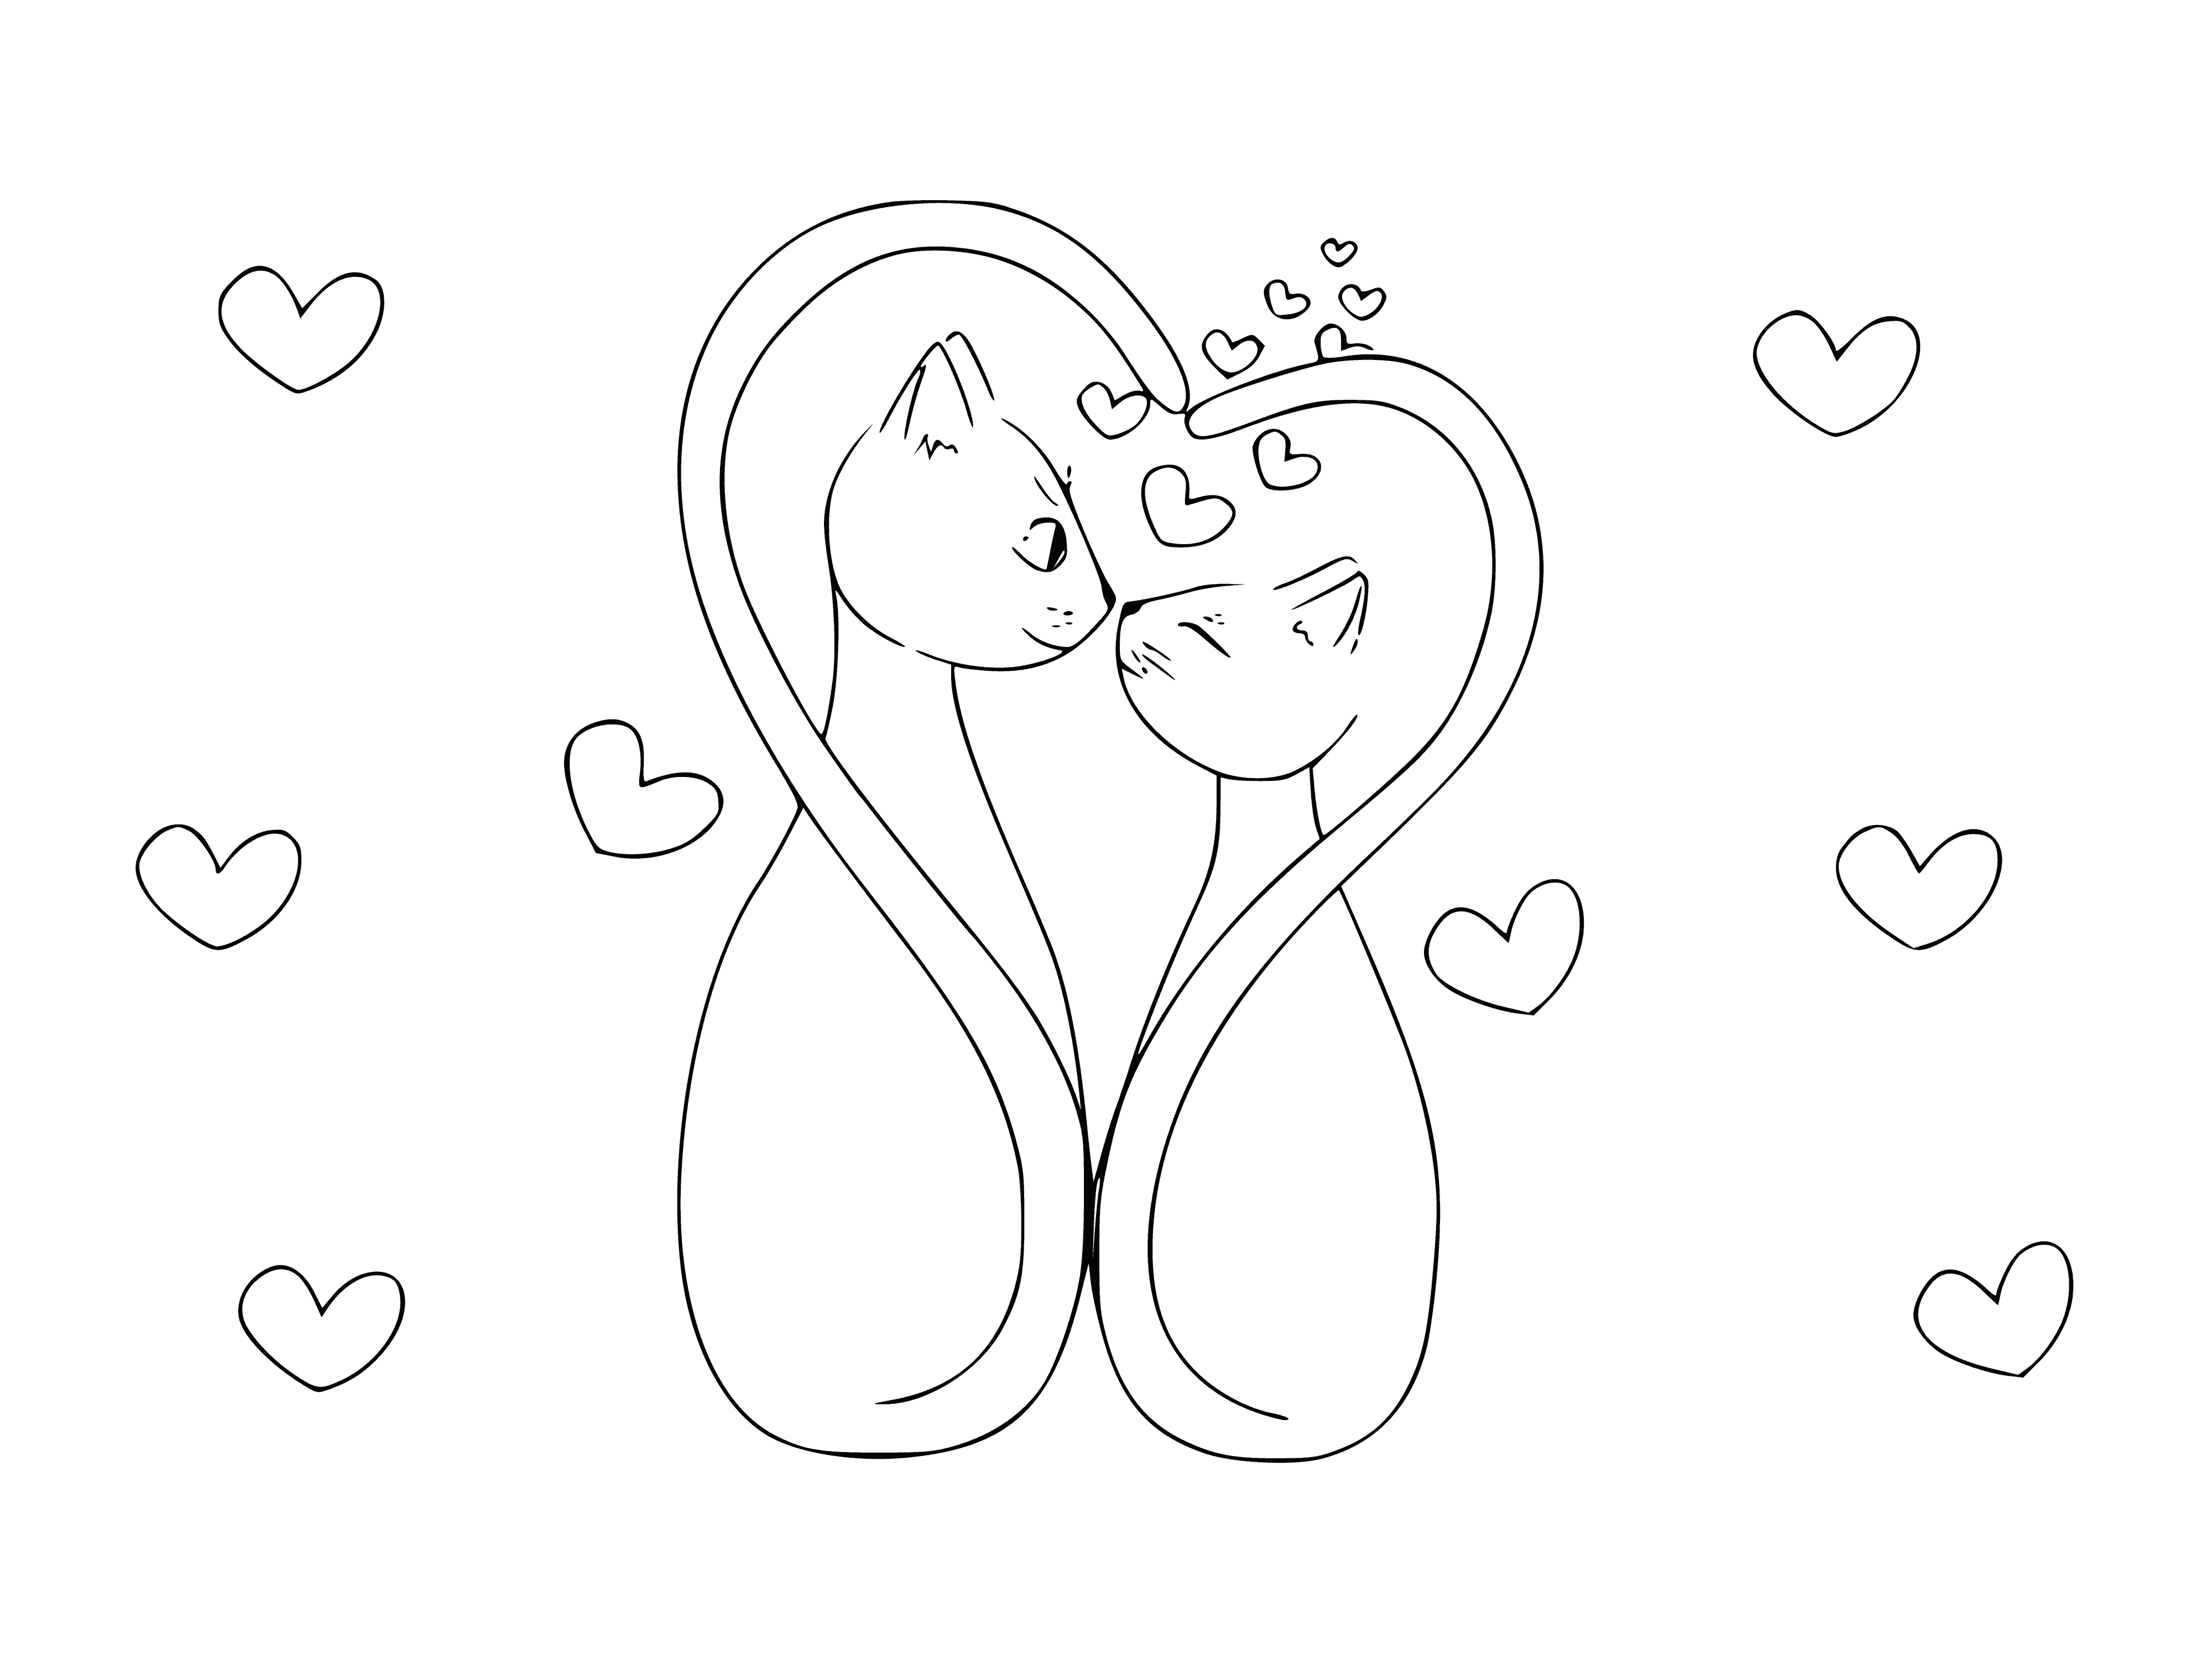 coloring page: Two cats in love, one white & black spotted, one black & white, standing on a pink background. #CatsInLove